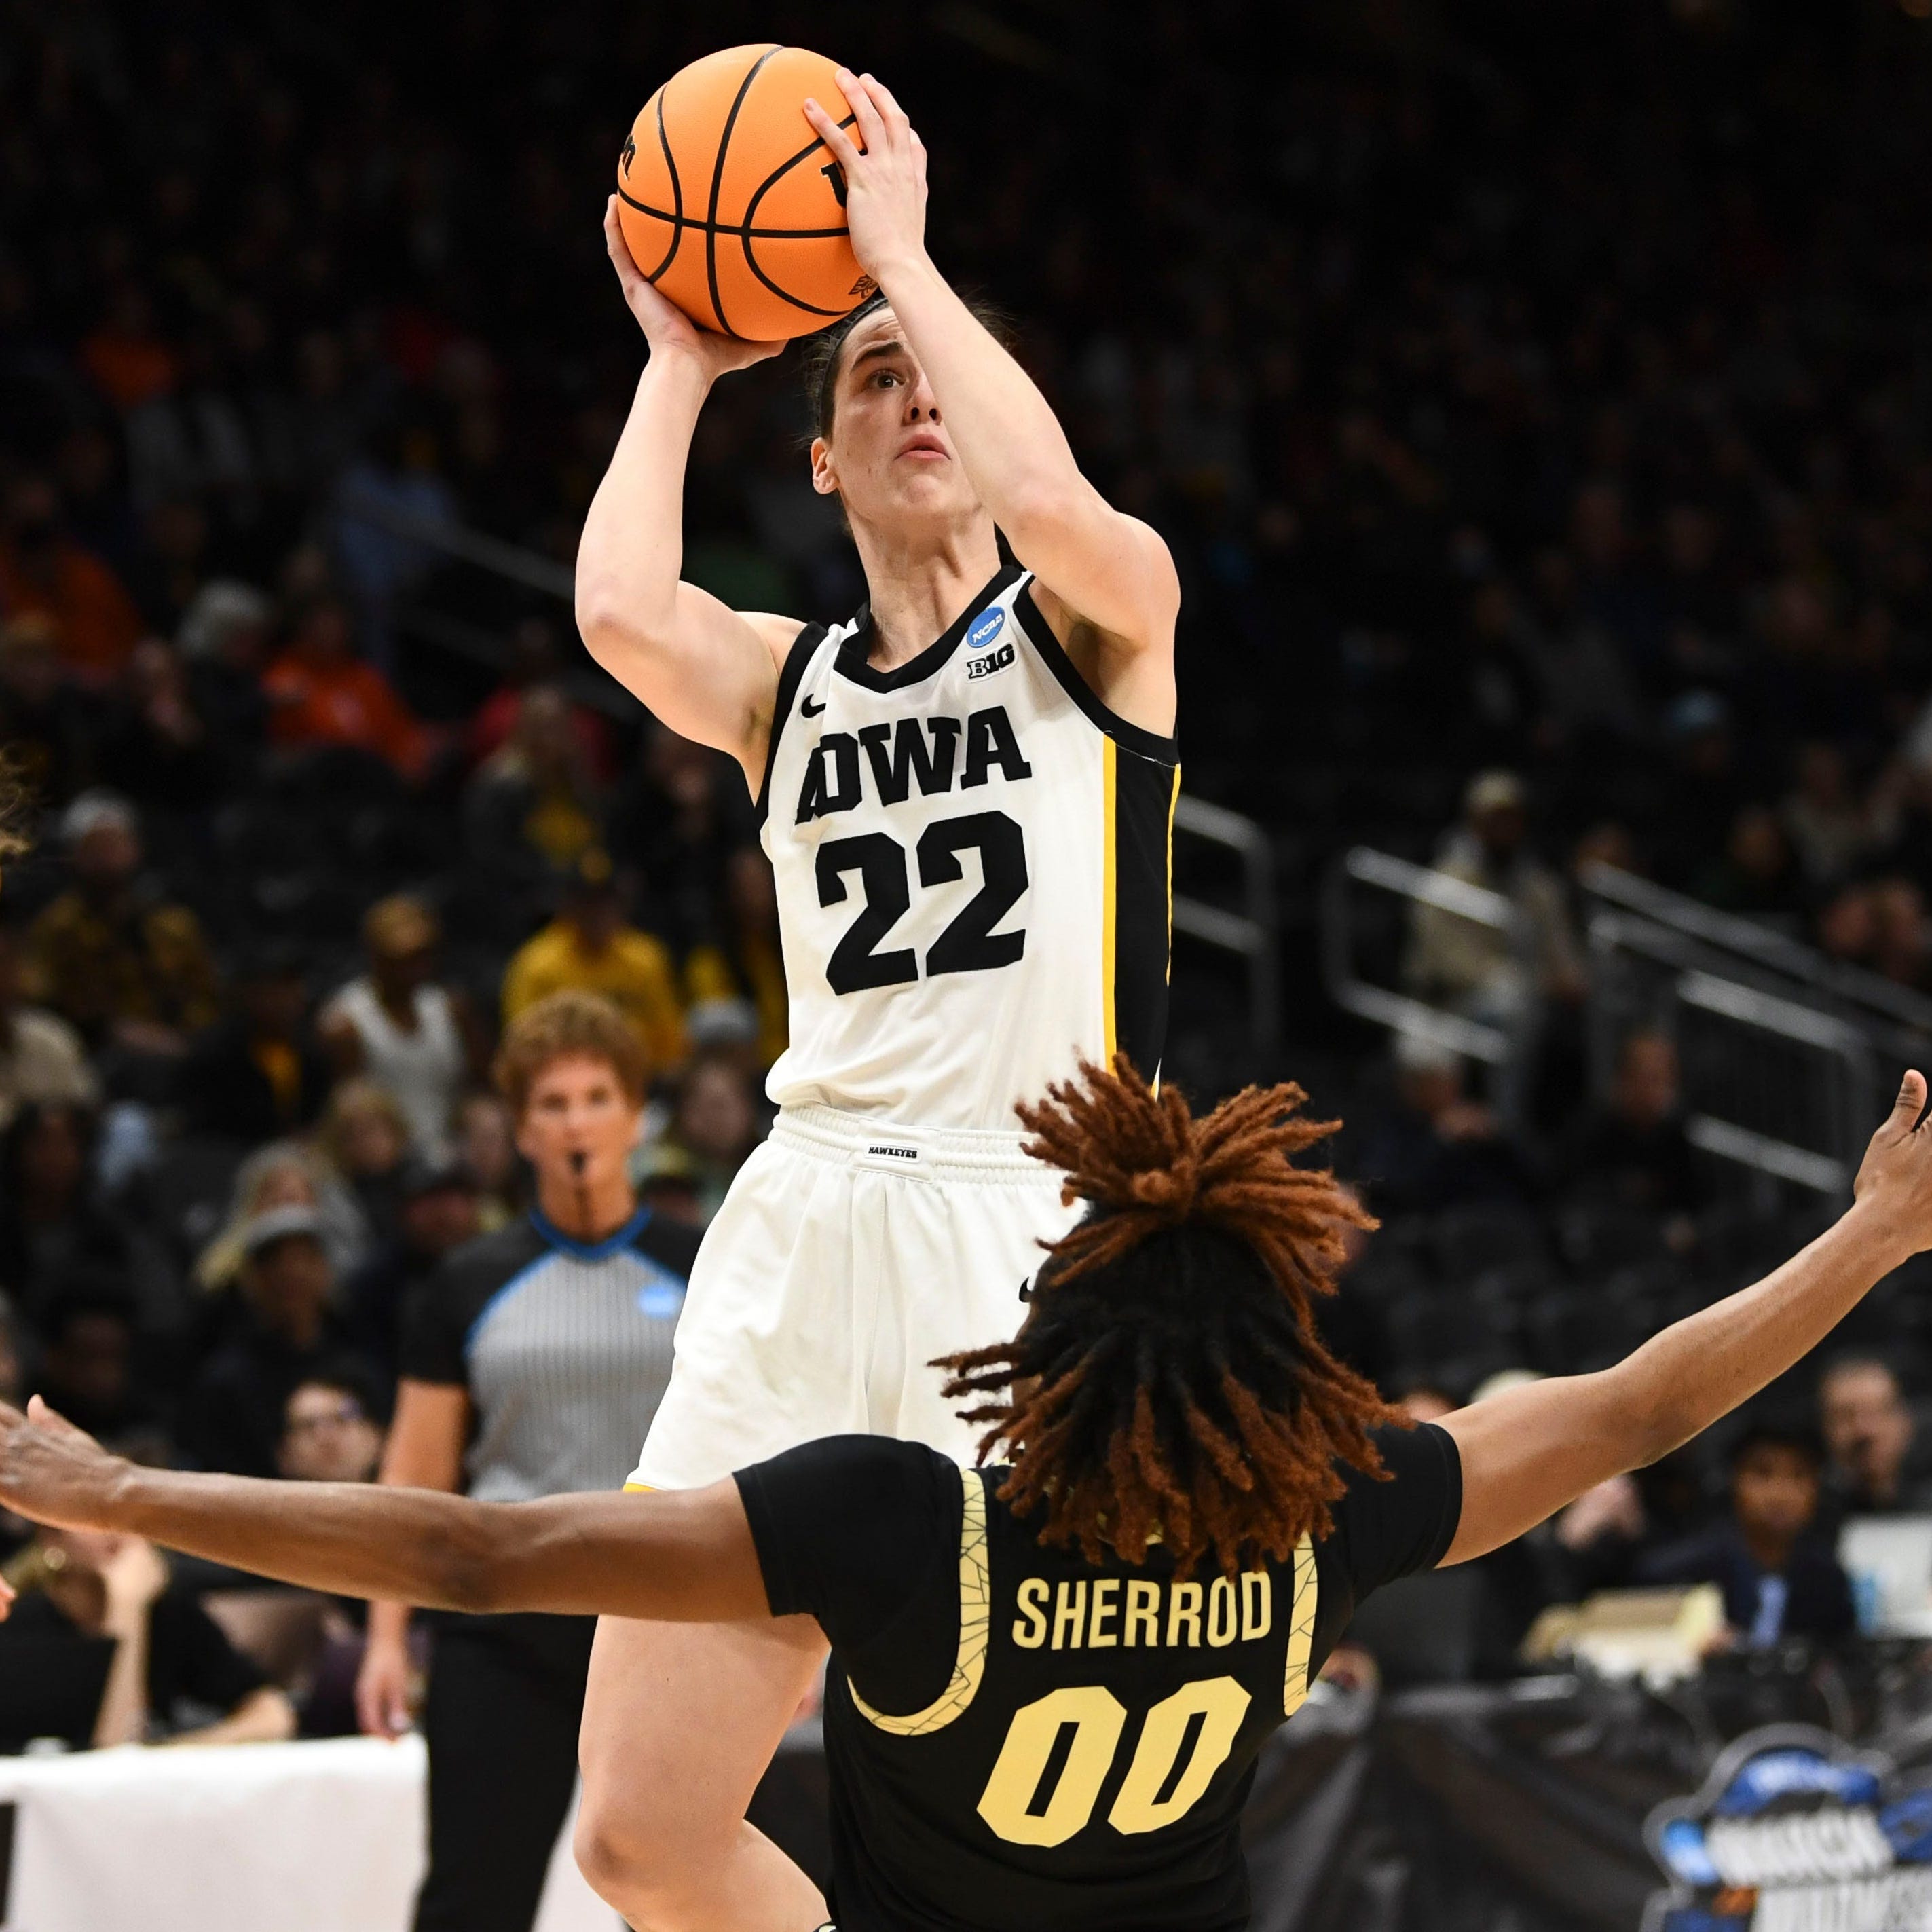 Iowa's Caitlin Clark (22) shots over Colorado's Jaylyn Sherrod during their Sweet 16 game in the NCAA women's basketball tournament.